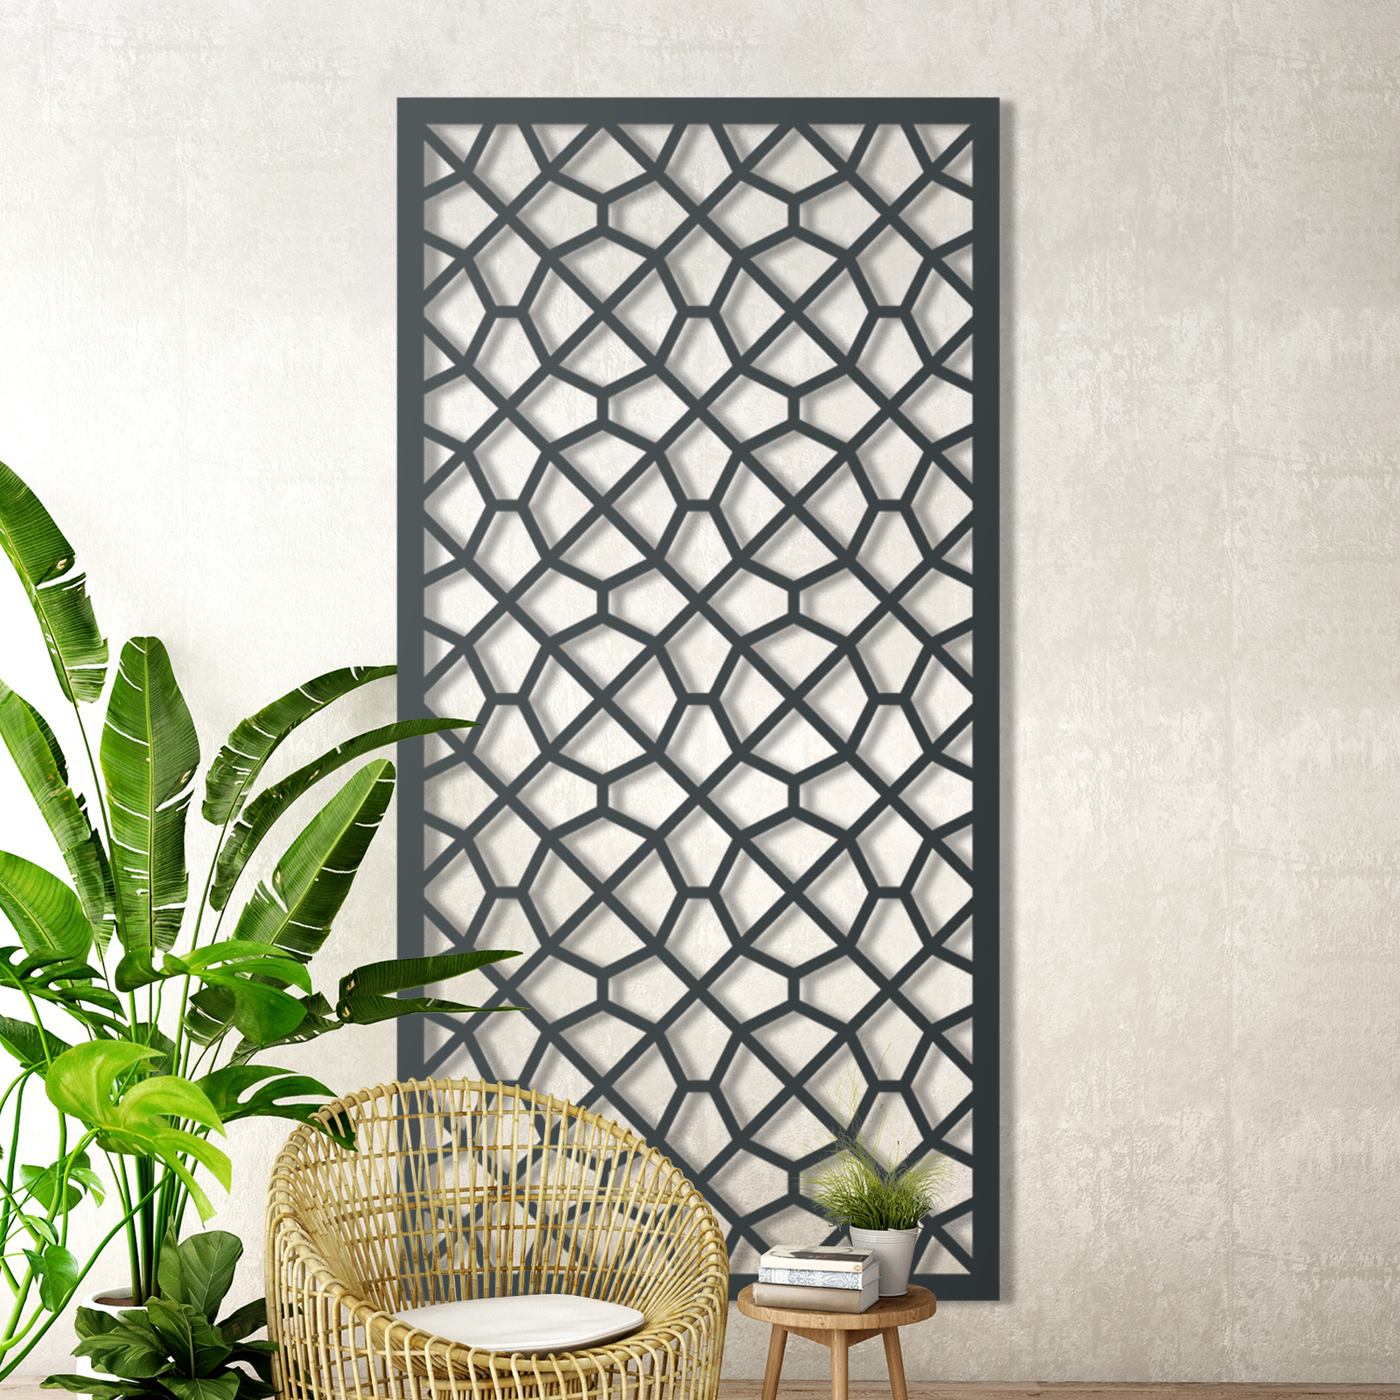 Stained Glass Metal Screen: The Perfect Way to Keep Your Garden Private and Stylish